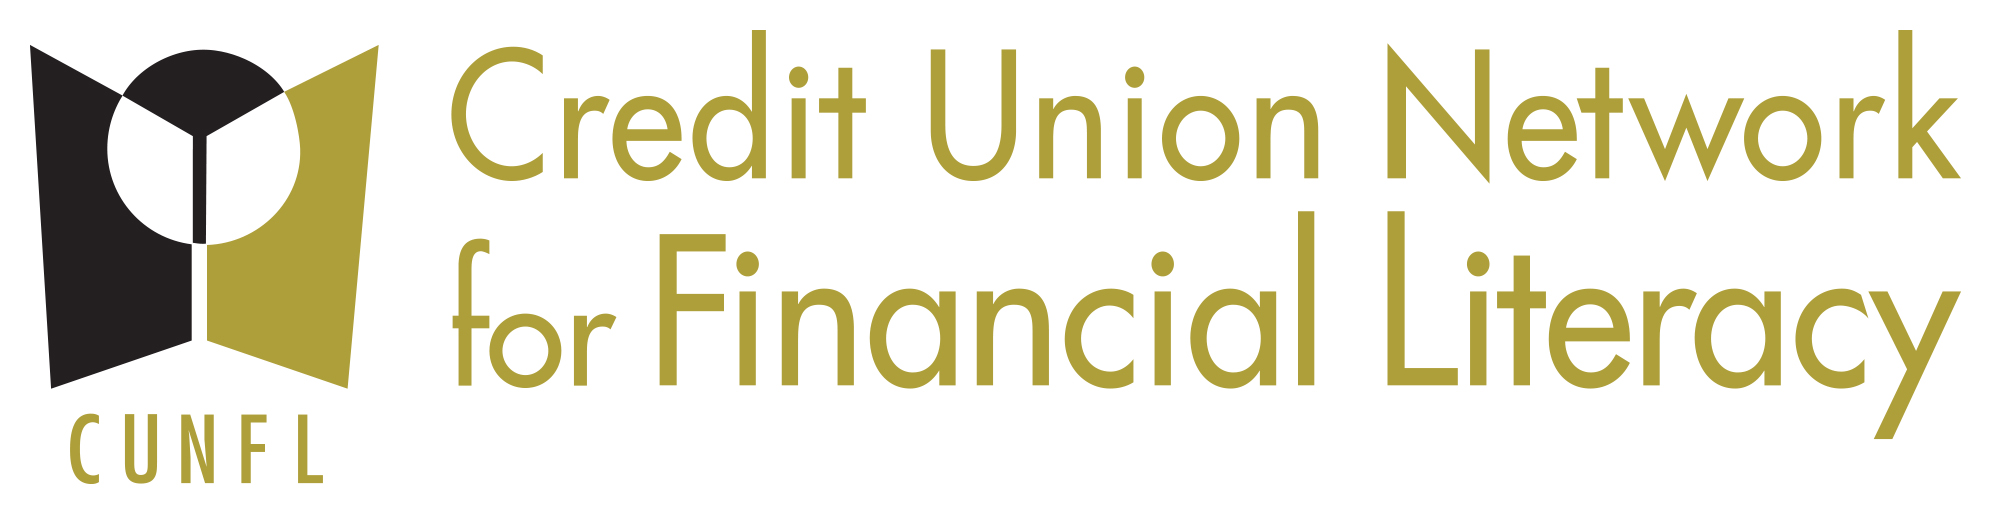 Credit Union Network for Financial Literacy